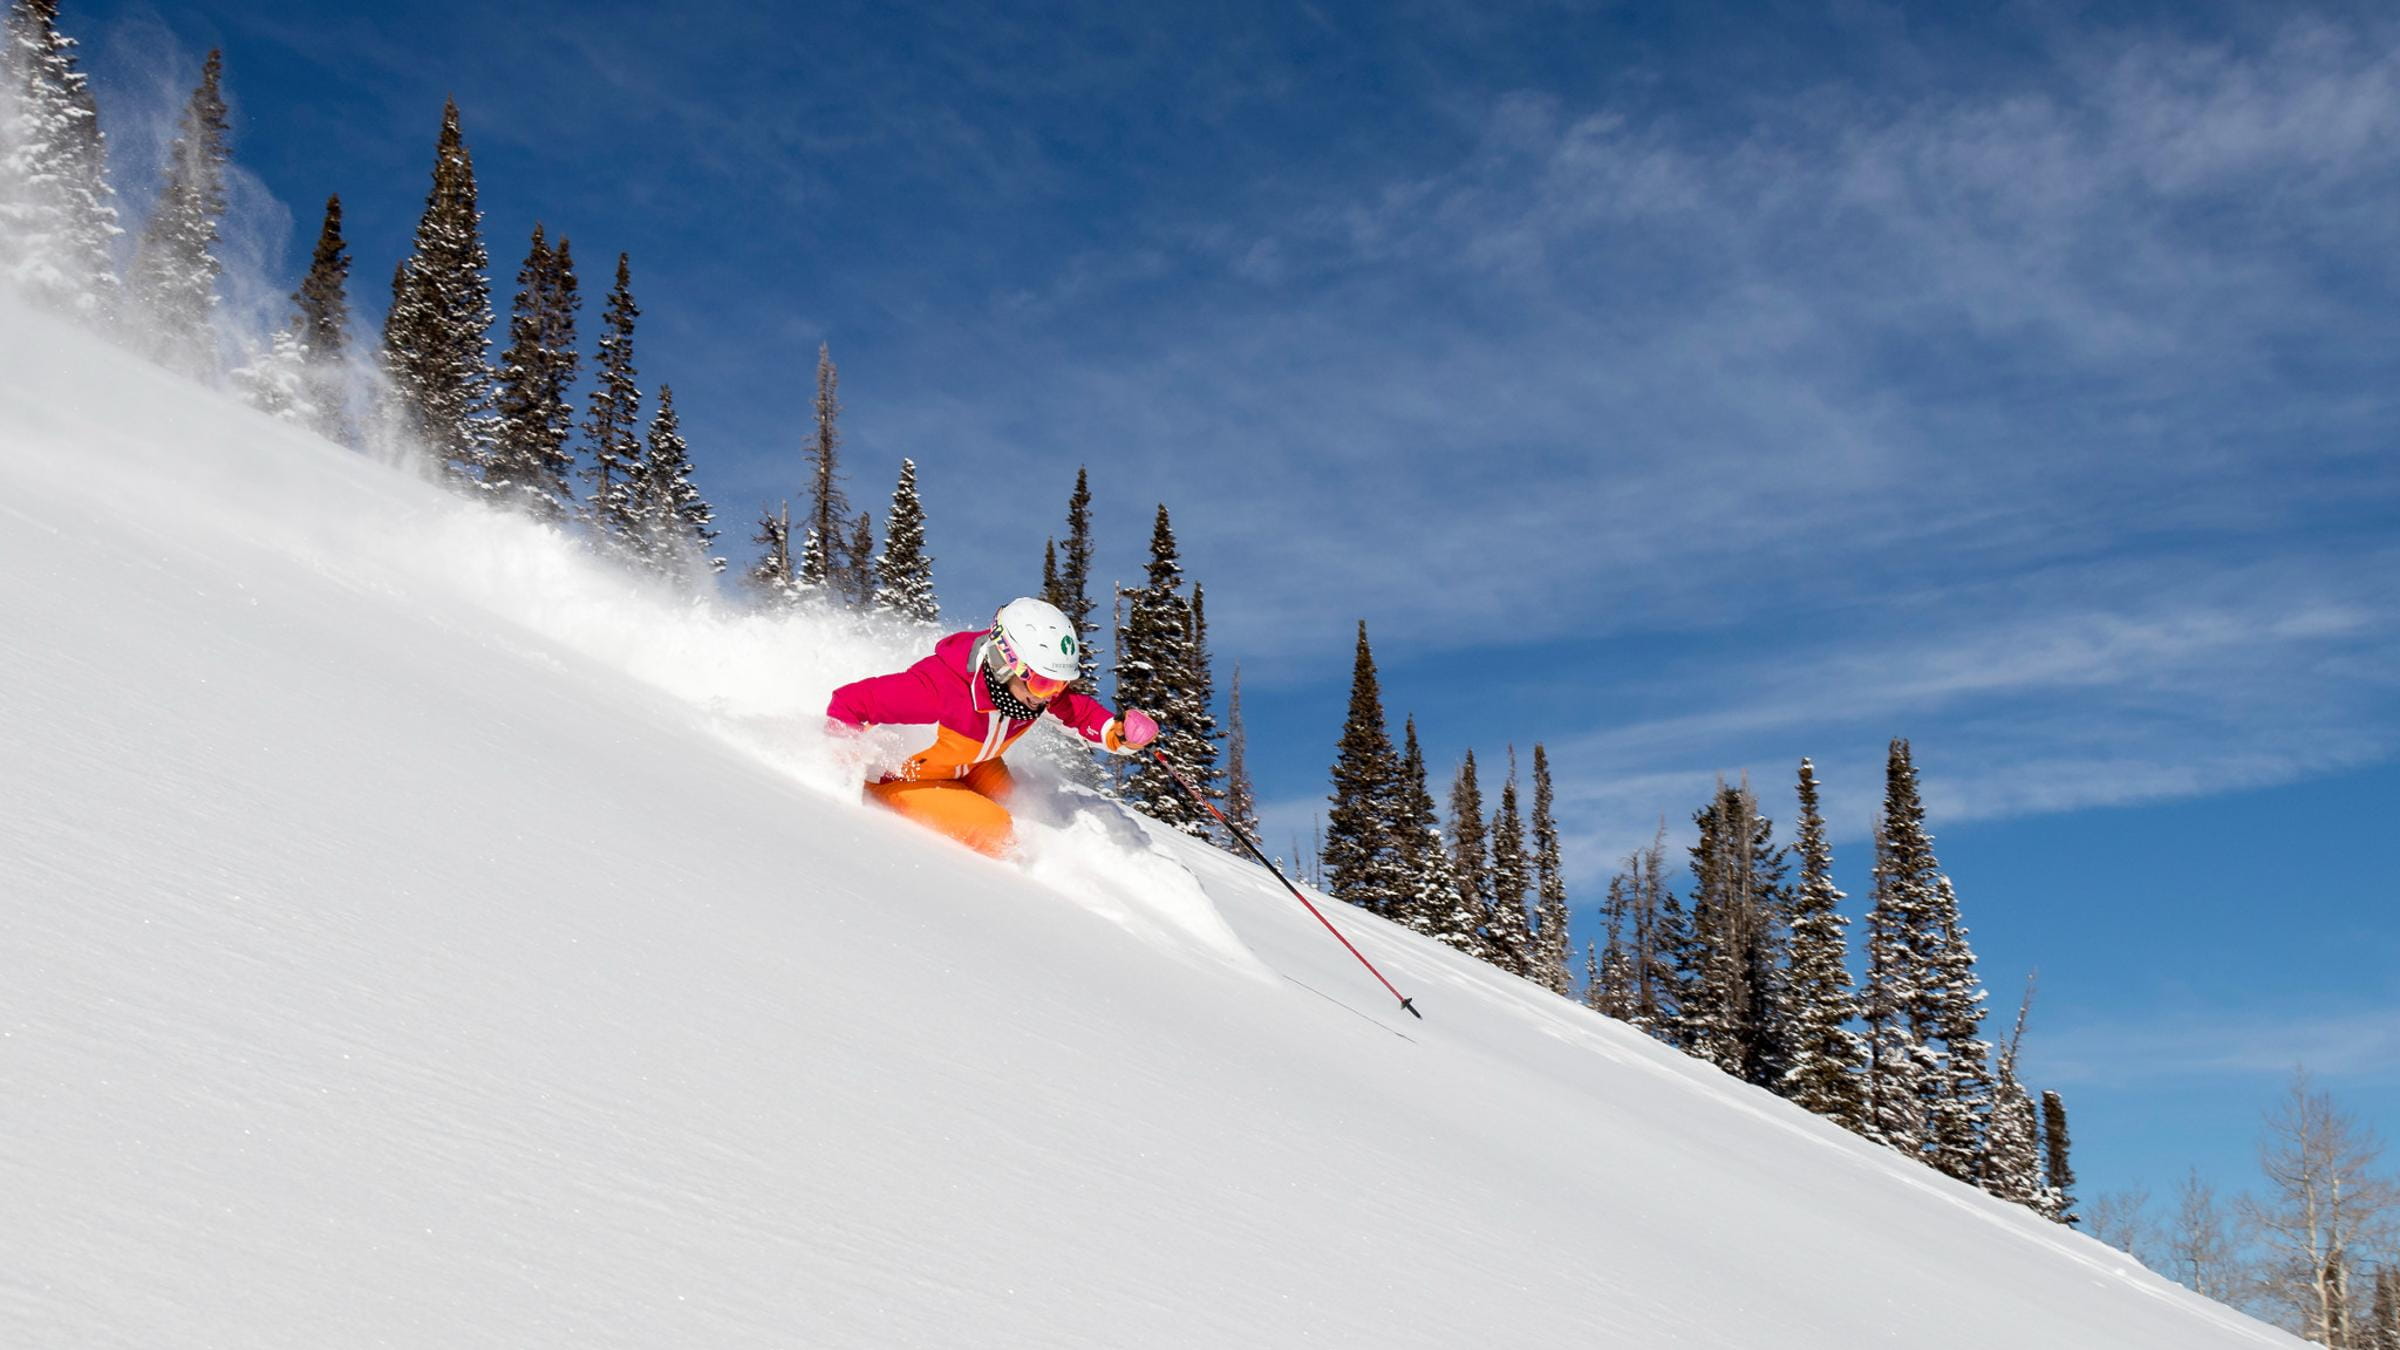 A guest skiing in deep powder on a sunny day